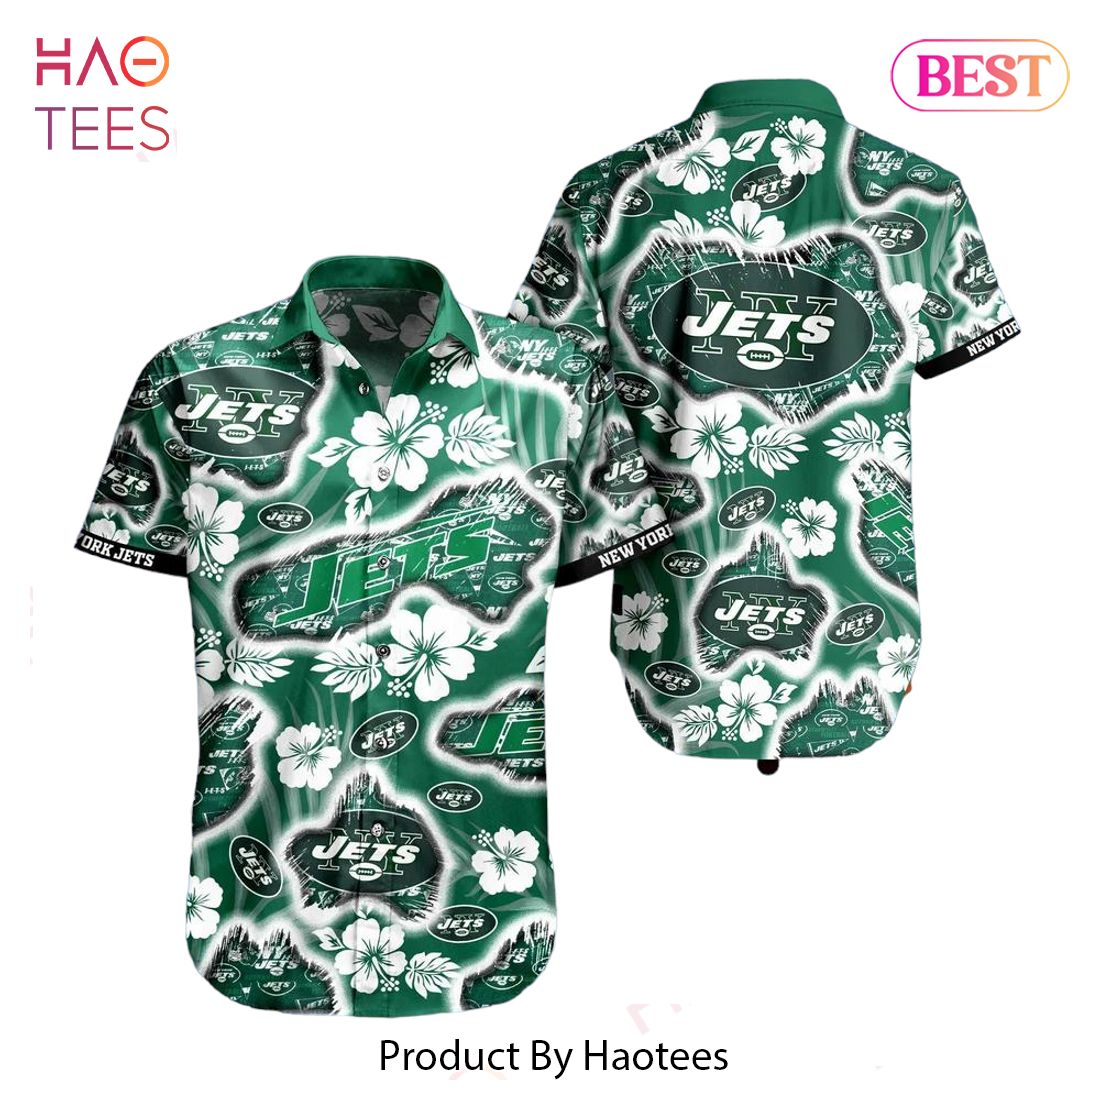 BEST New York Jets NFL Hawaii Shirt Graphic Floral Printed This